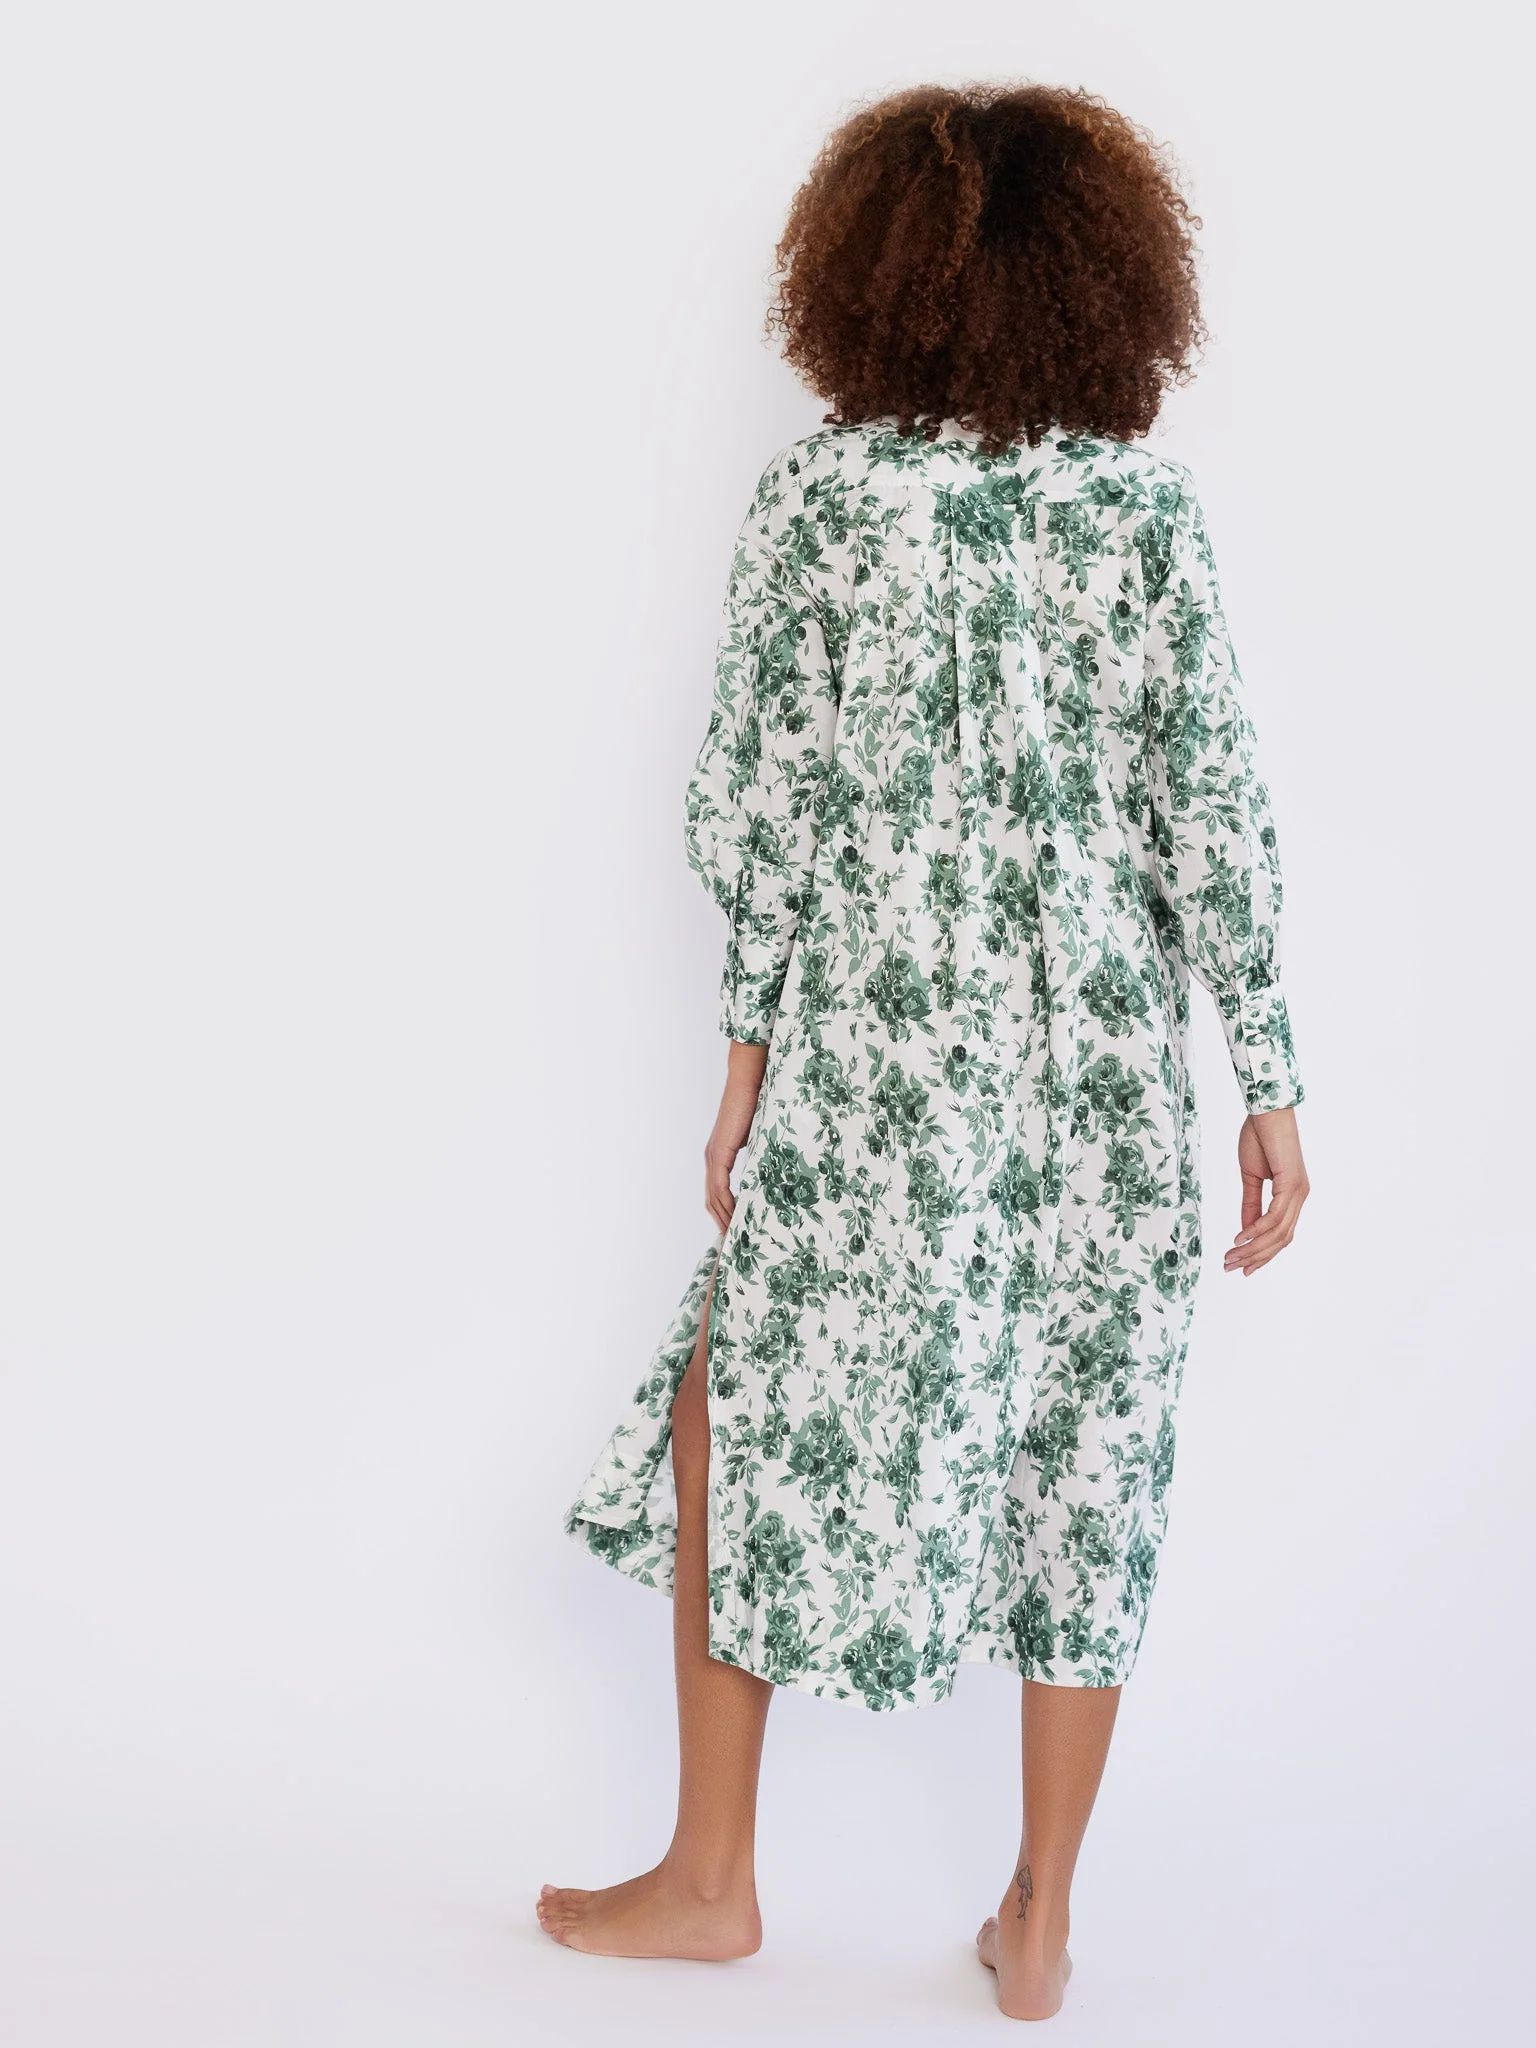 Shop Mille - Esther Dress in Green Bouquet | Mille